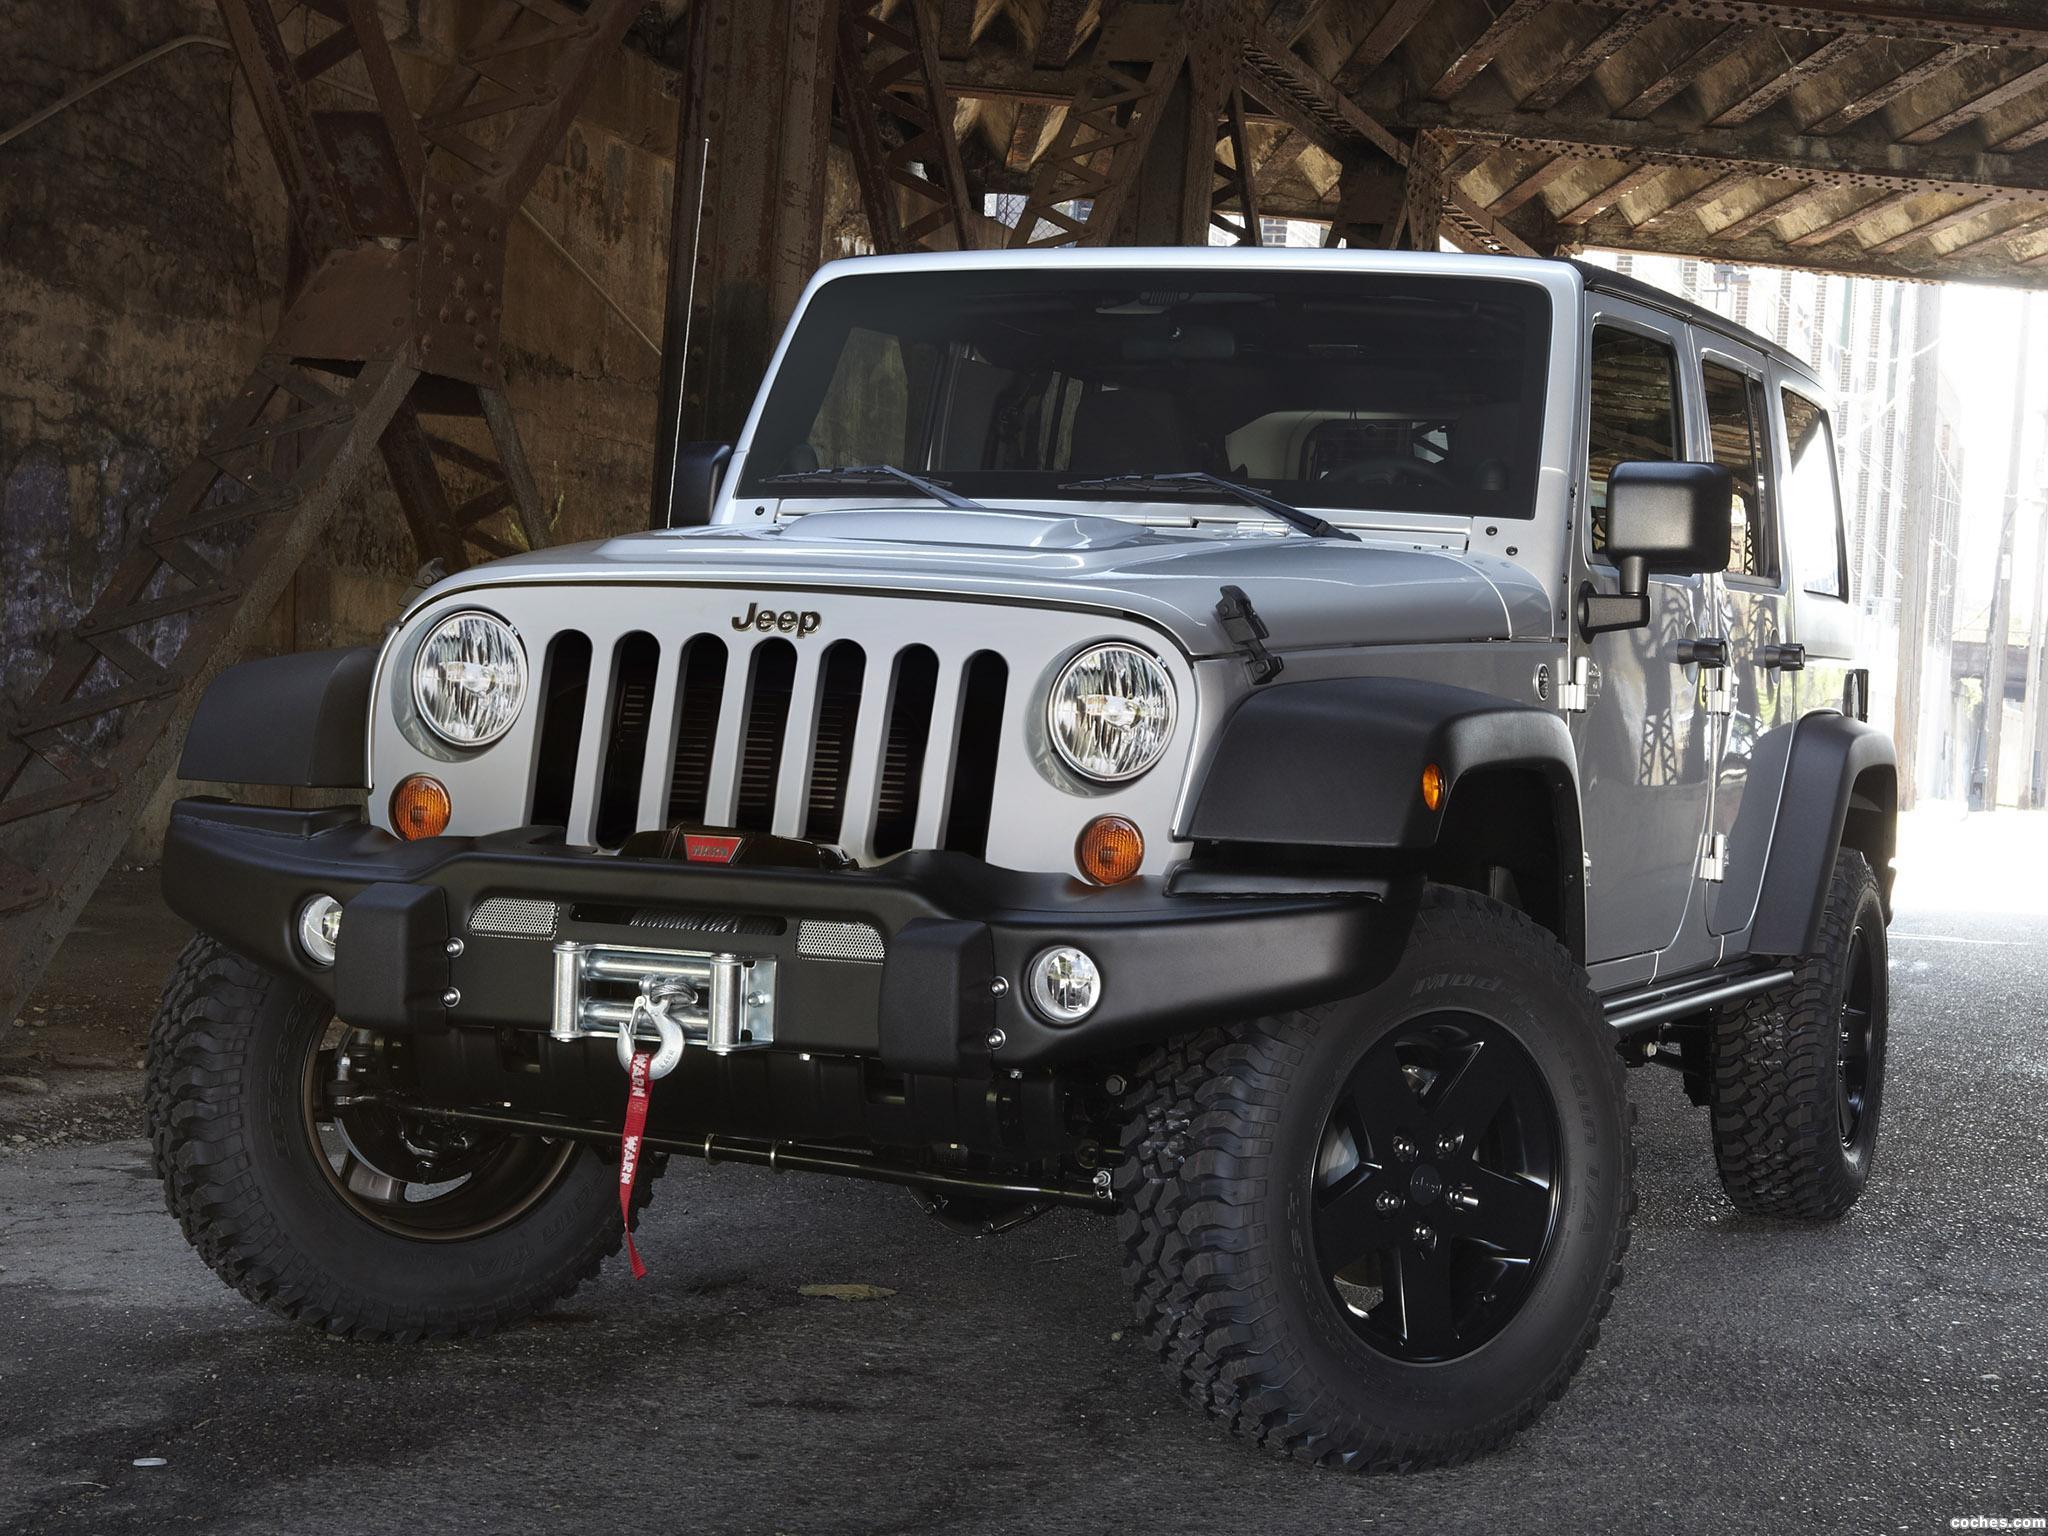 jeep_wrangler-call-of-duty-mw3-special-edition-2011_r12